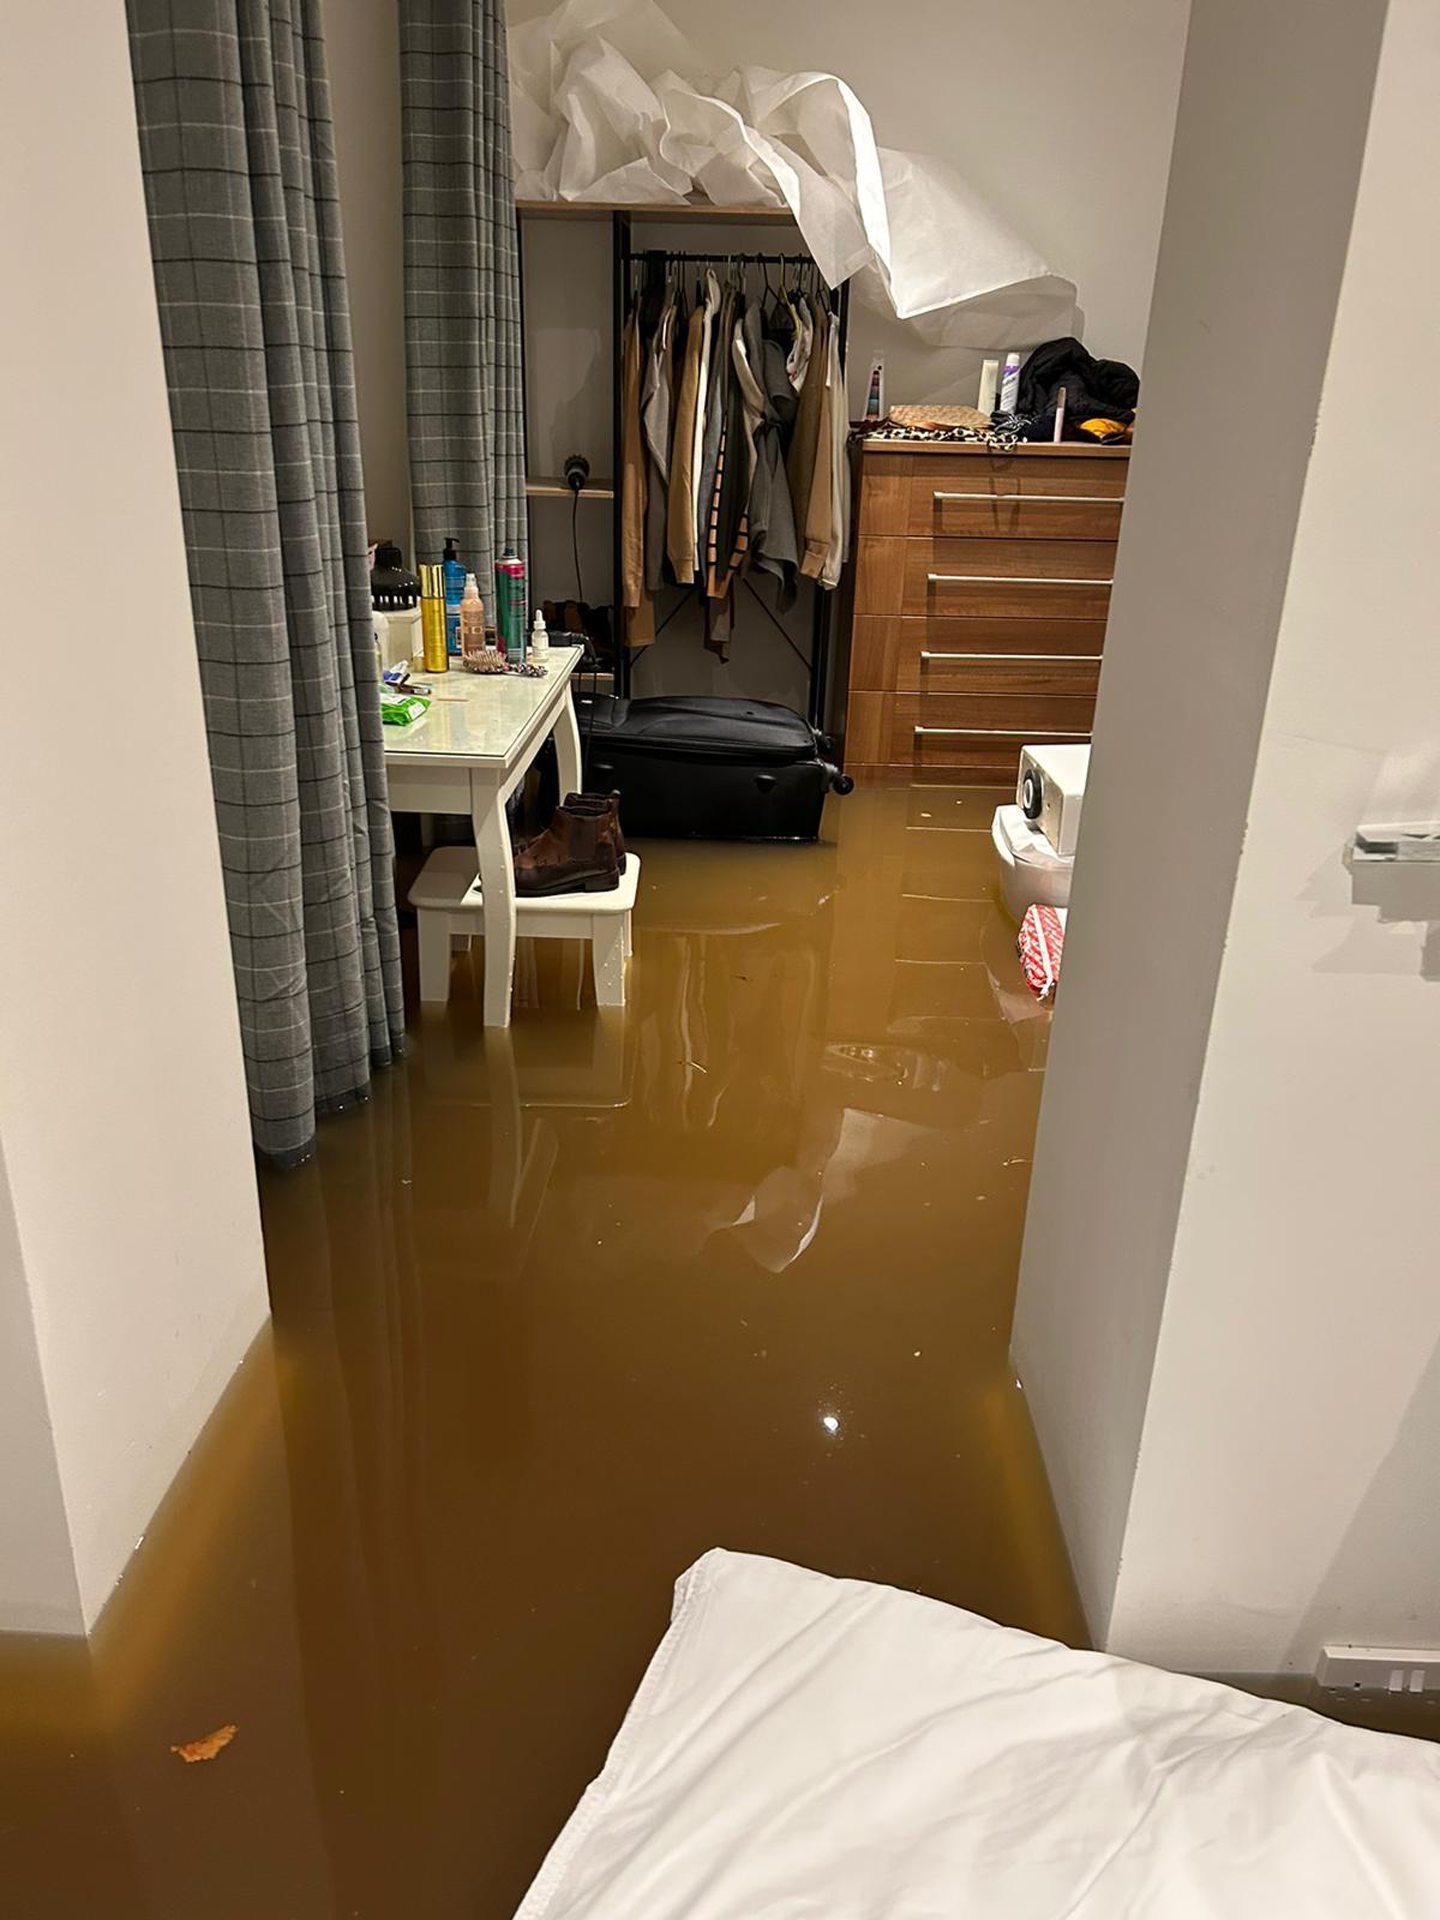 Destroyed furniture at Perth Airbnb with flooding 